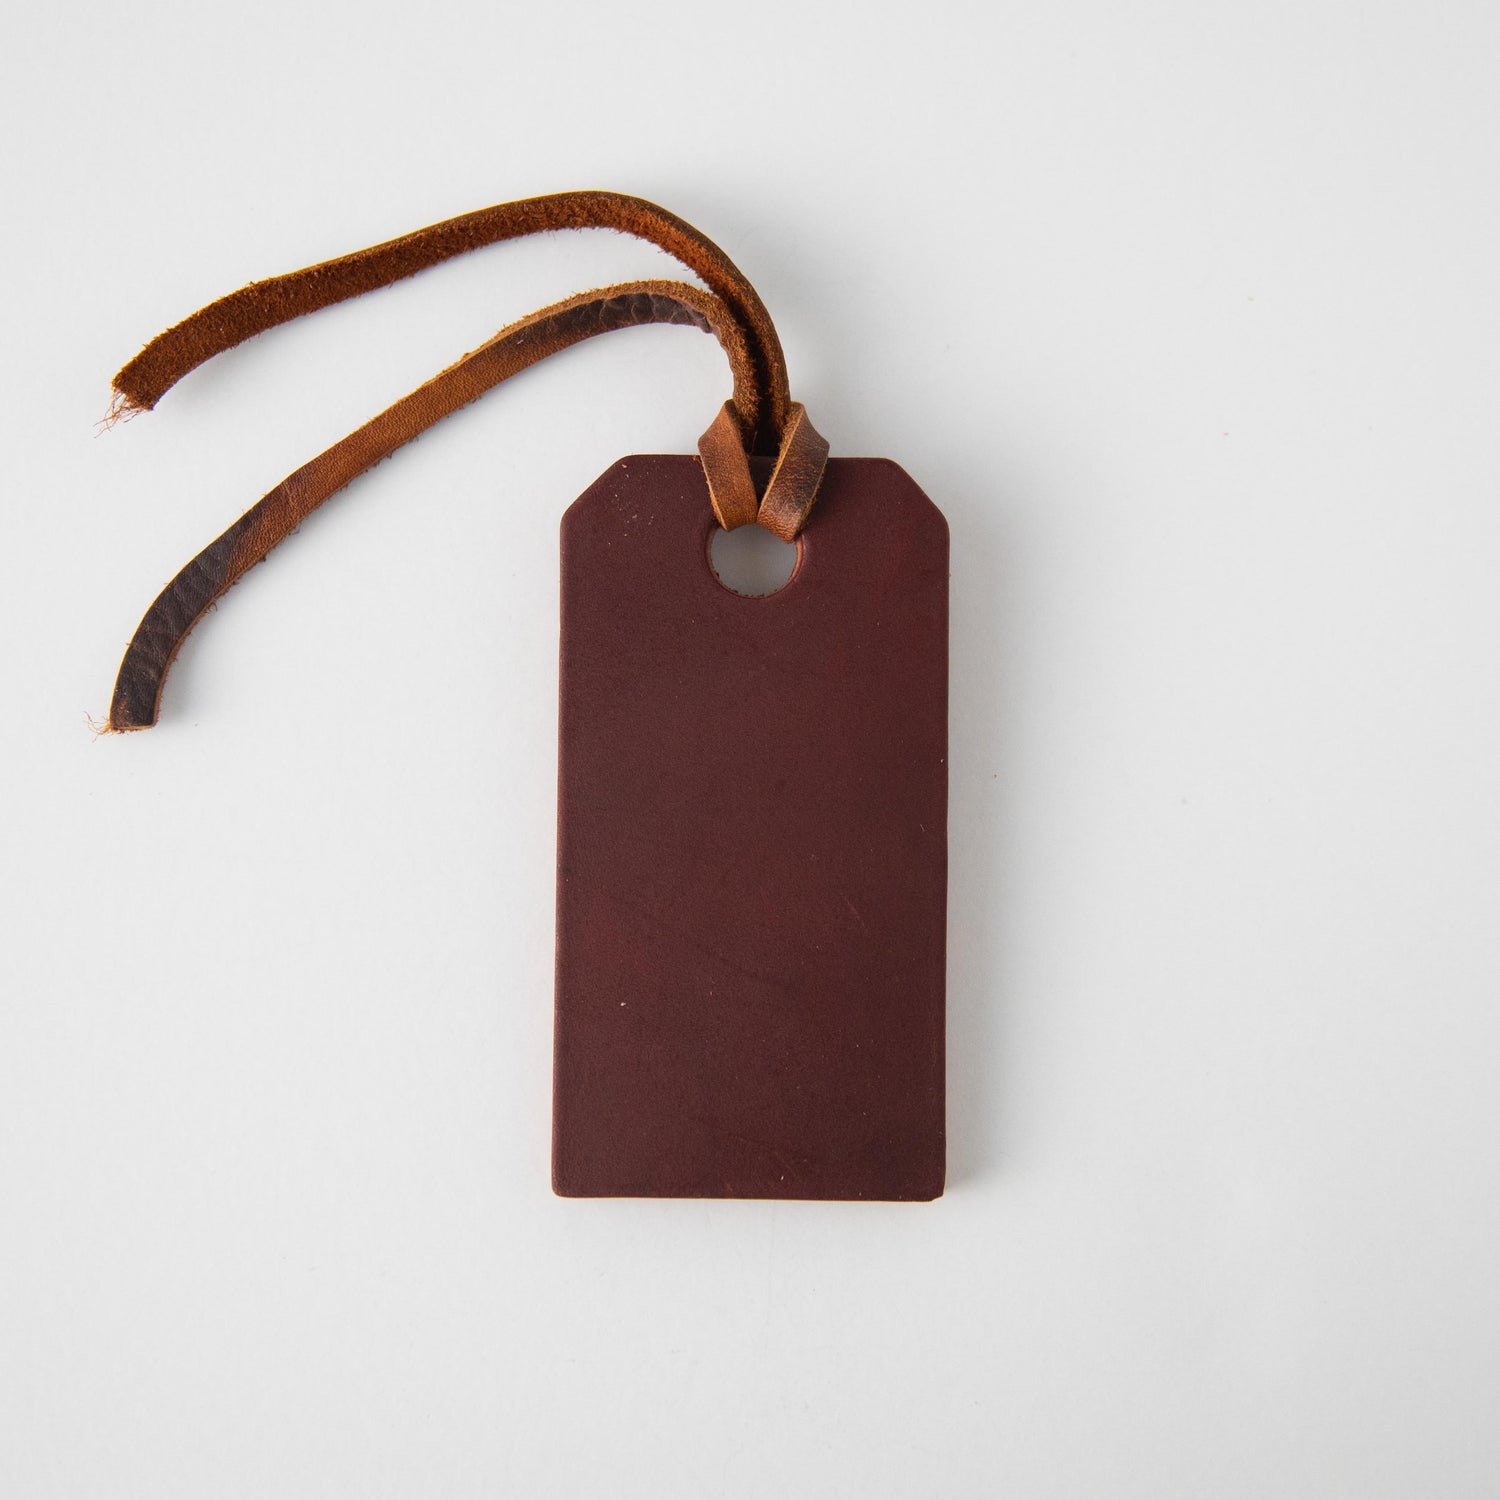 Fjallraven - Leather Luggage Tag, Leather Cognac